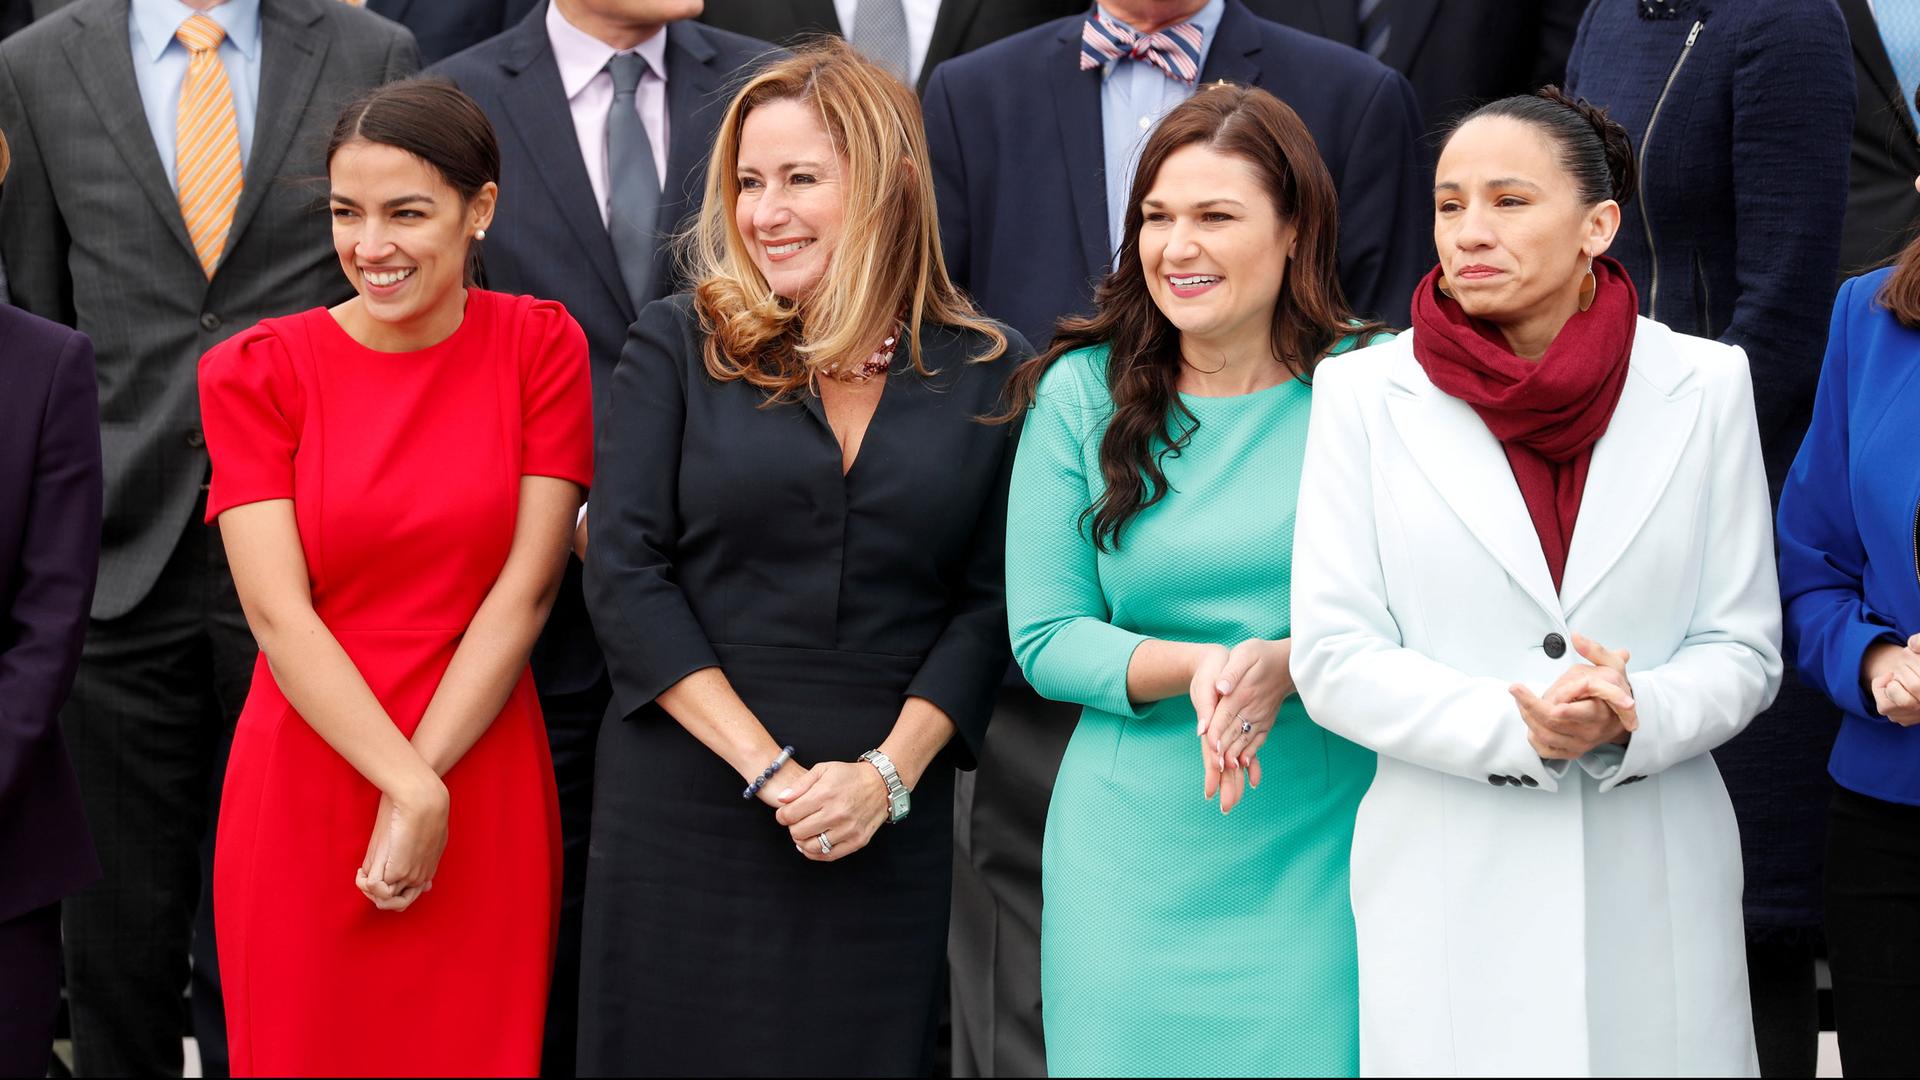 Four women are lined up for a group picture.